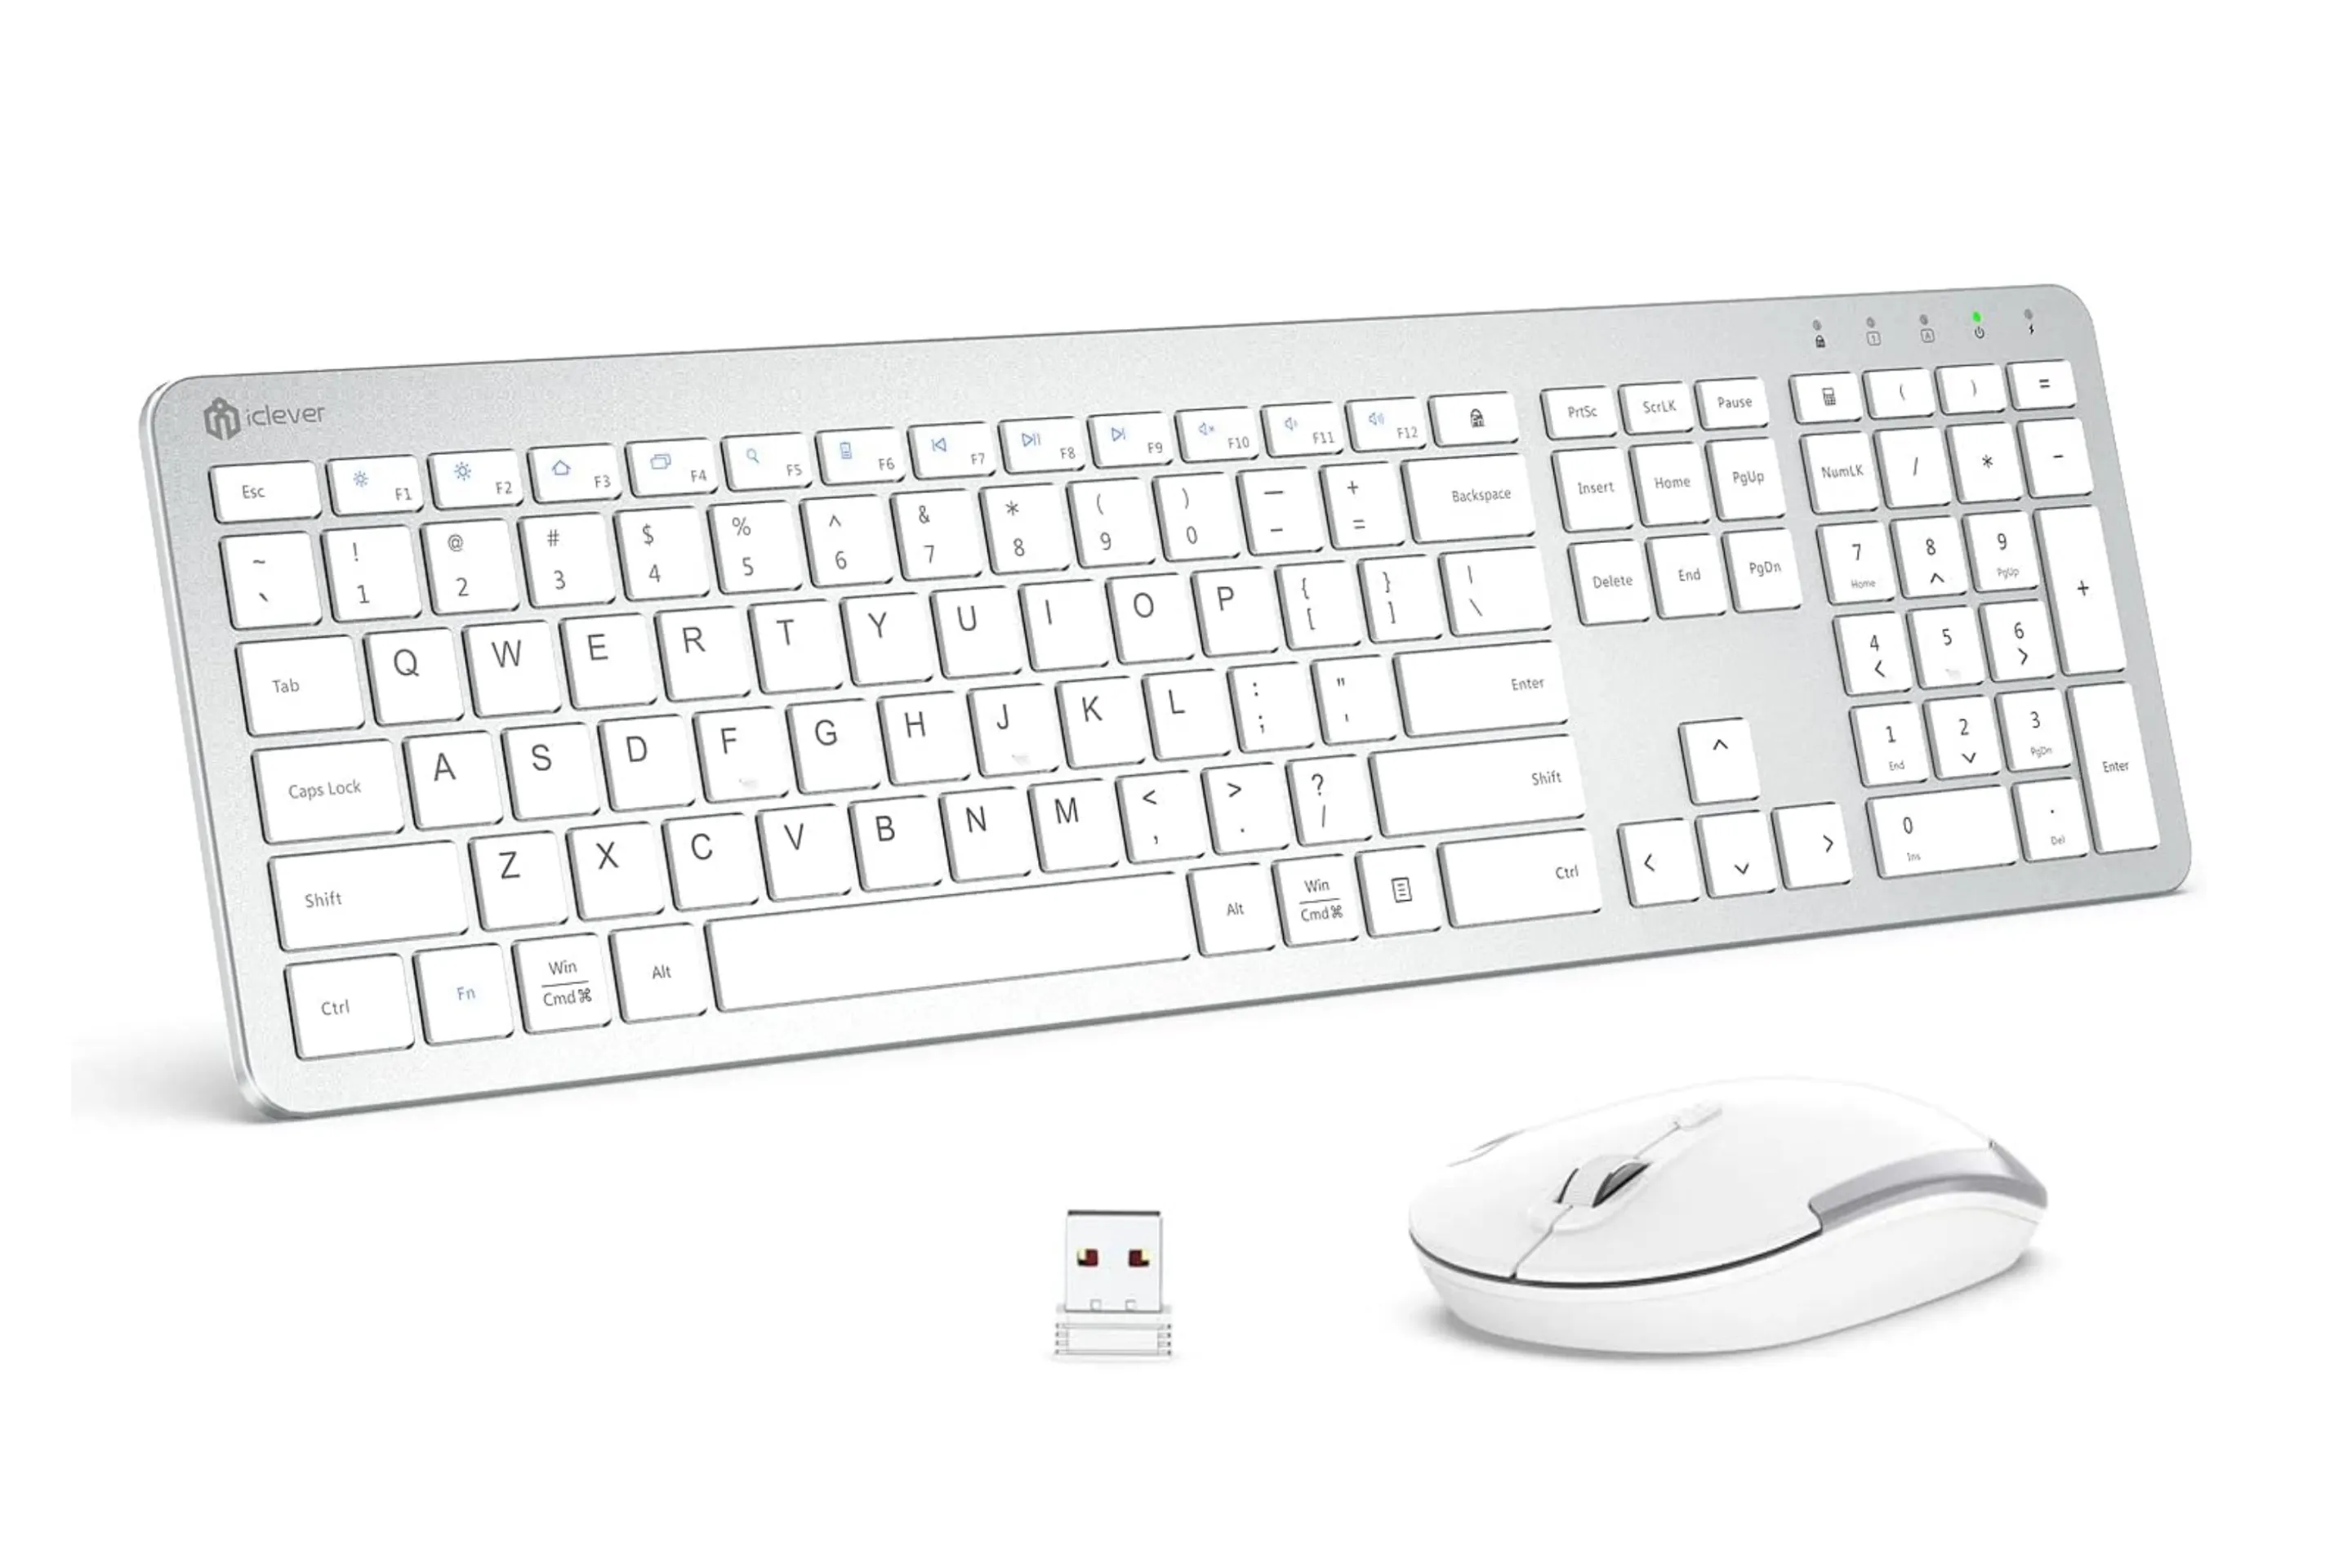 https://img.money.com/2023/02/iclever-gk08-wireless-keyboard-and-mouse.jpg